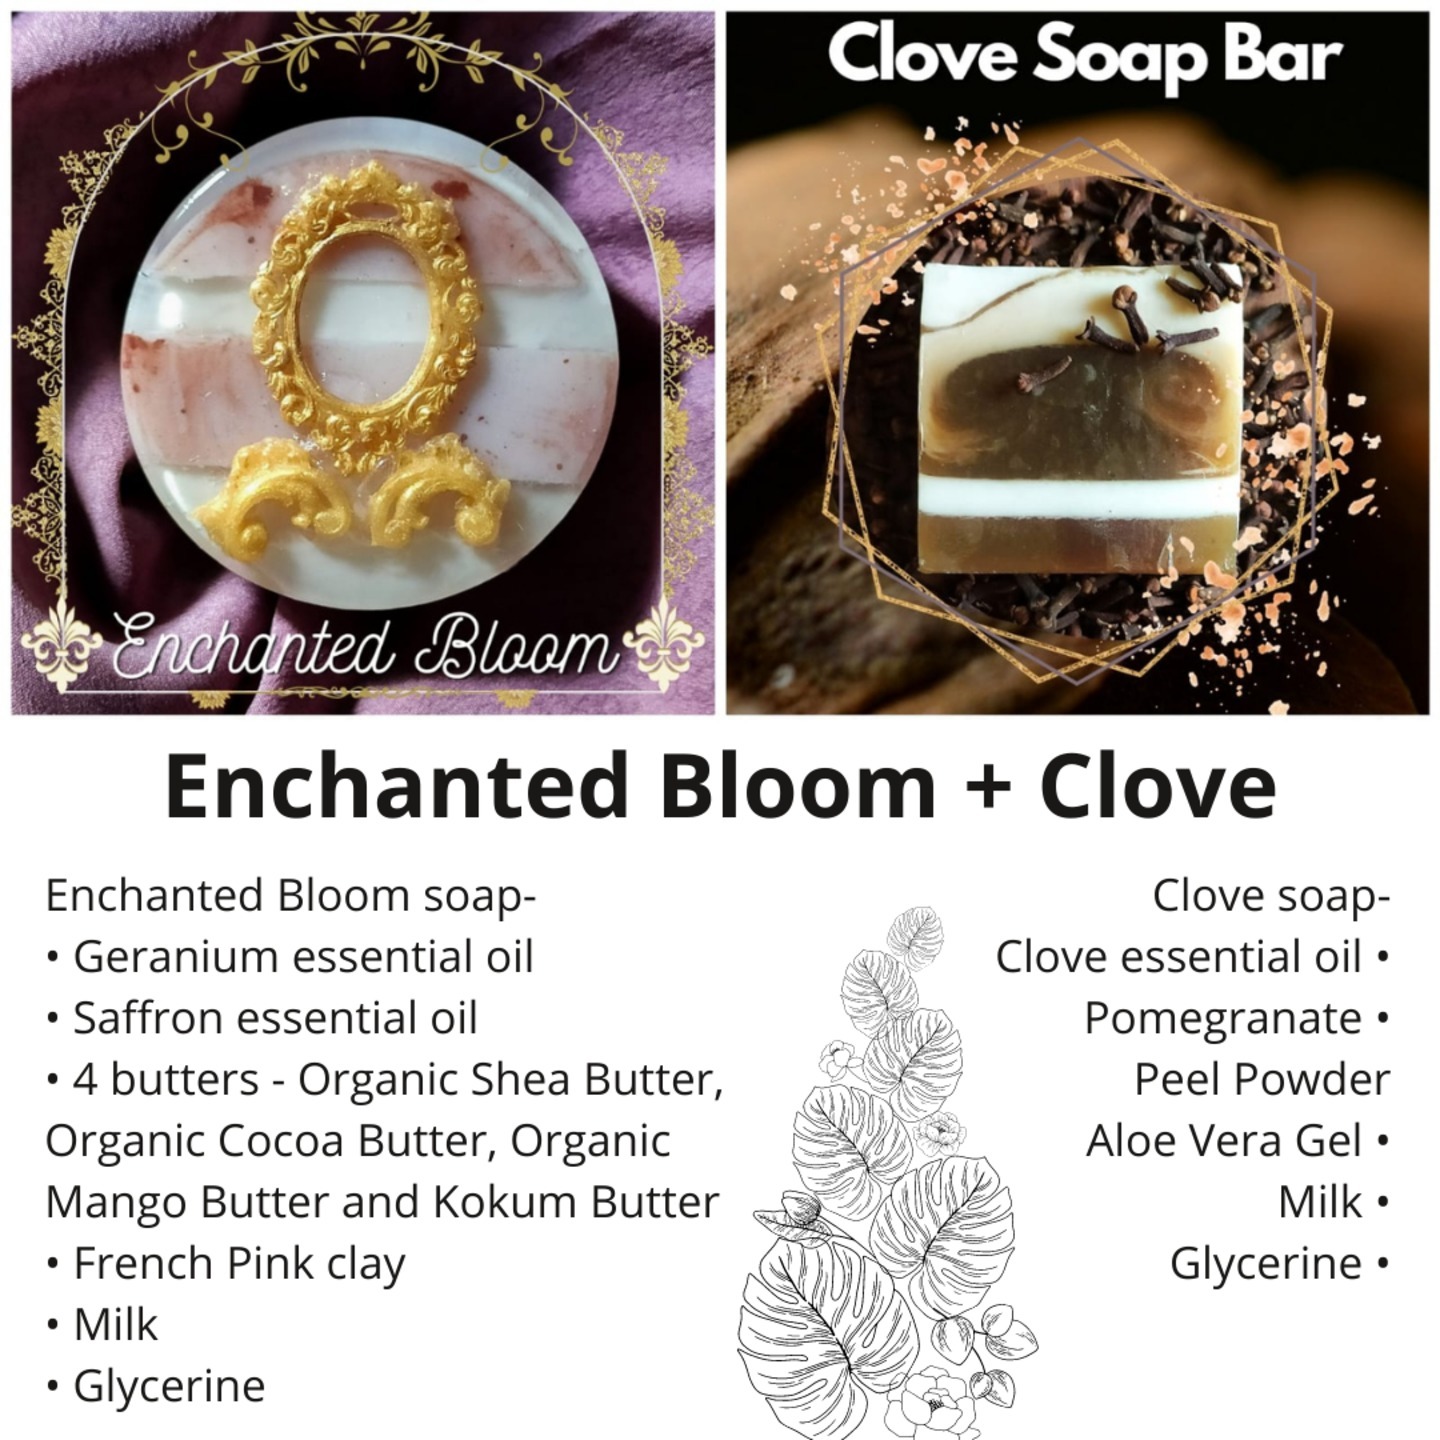 Enchanted Bloom Soap and Clove Soap Bars